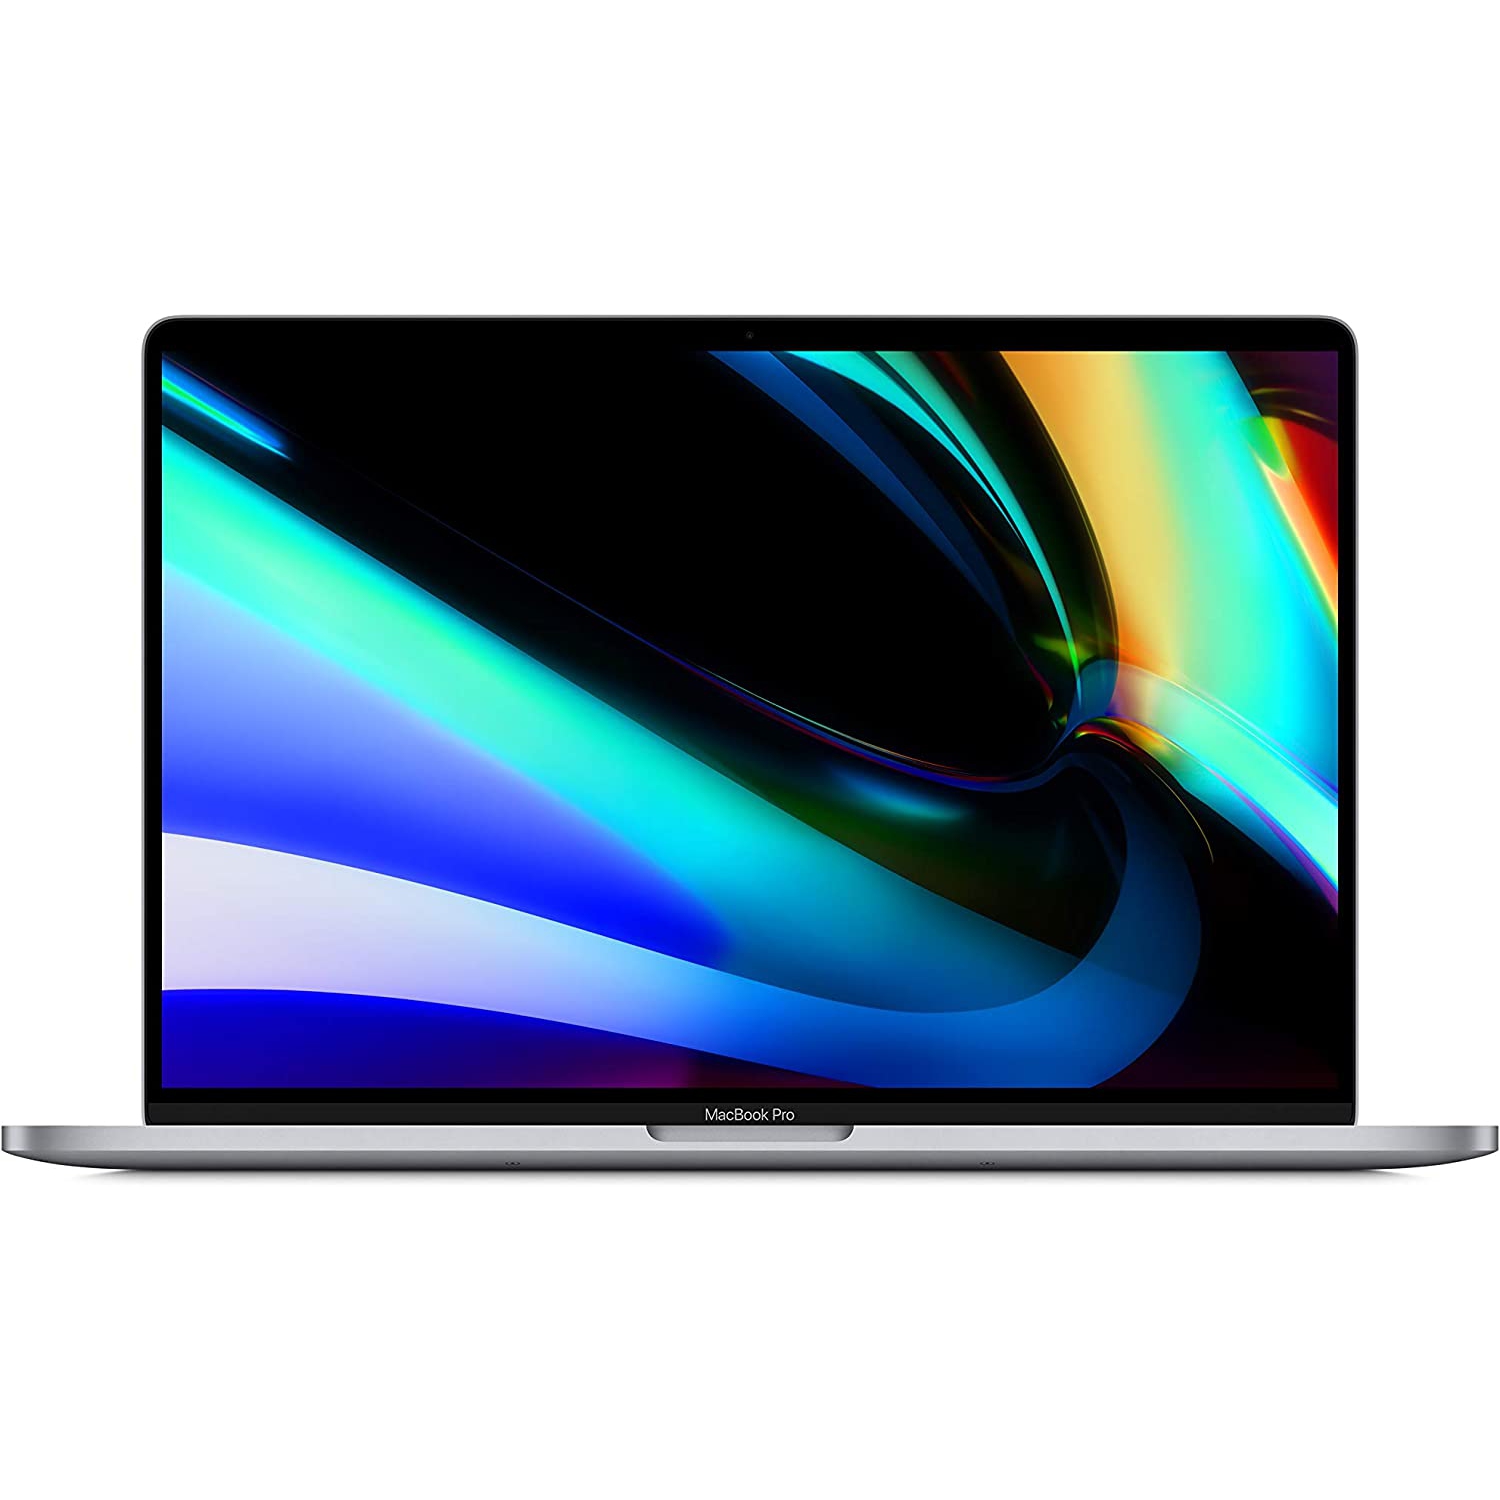 Refurbished (Excellent) - Apple MacBook Pro 16" | W/ Touch Bar (2019) - (Intel Core i9 - 2.3GHz/1TB SSD/16GB RAM) – English – Space Grey